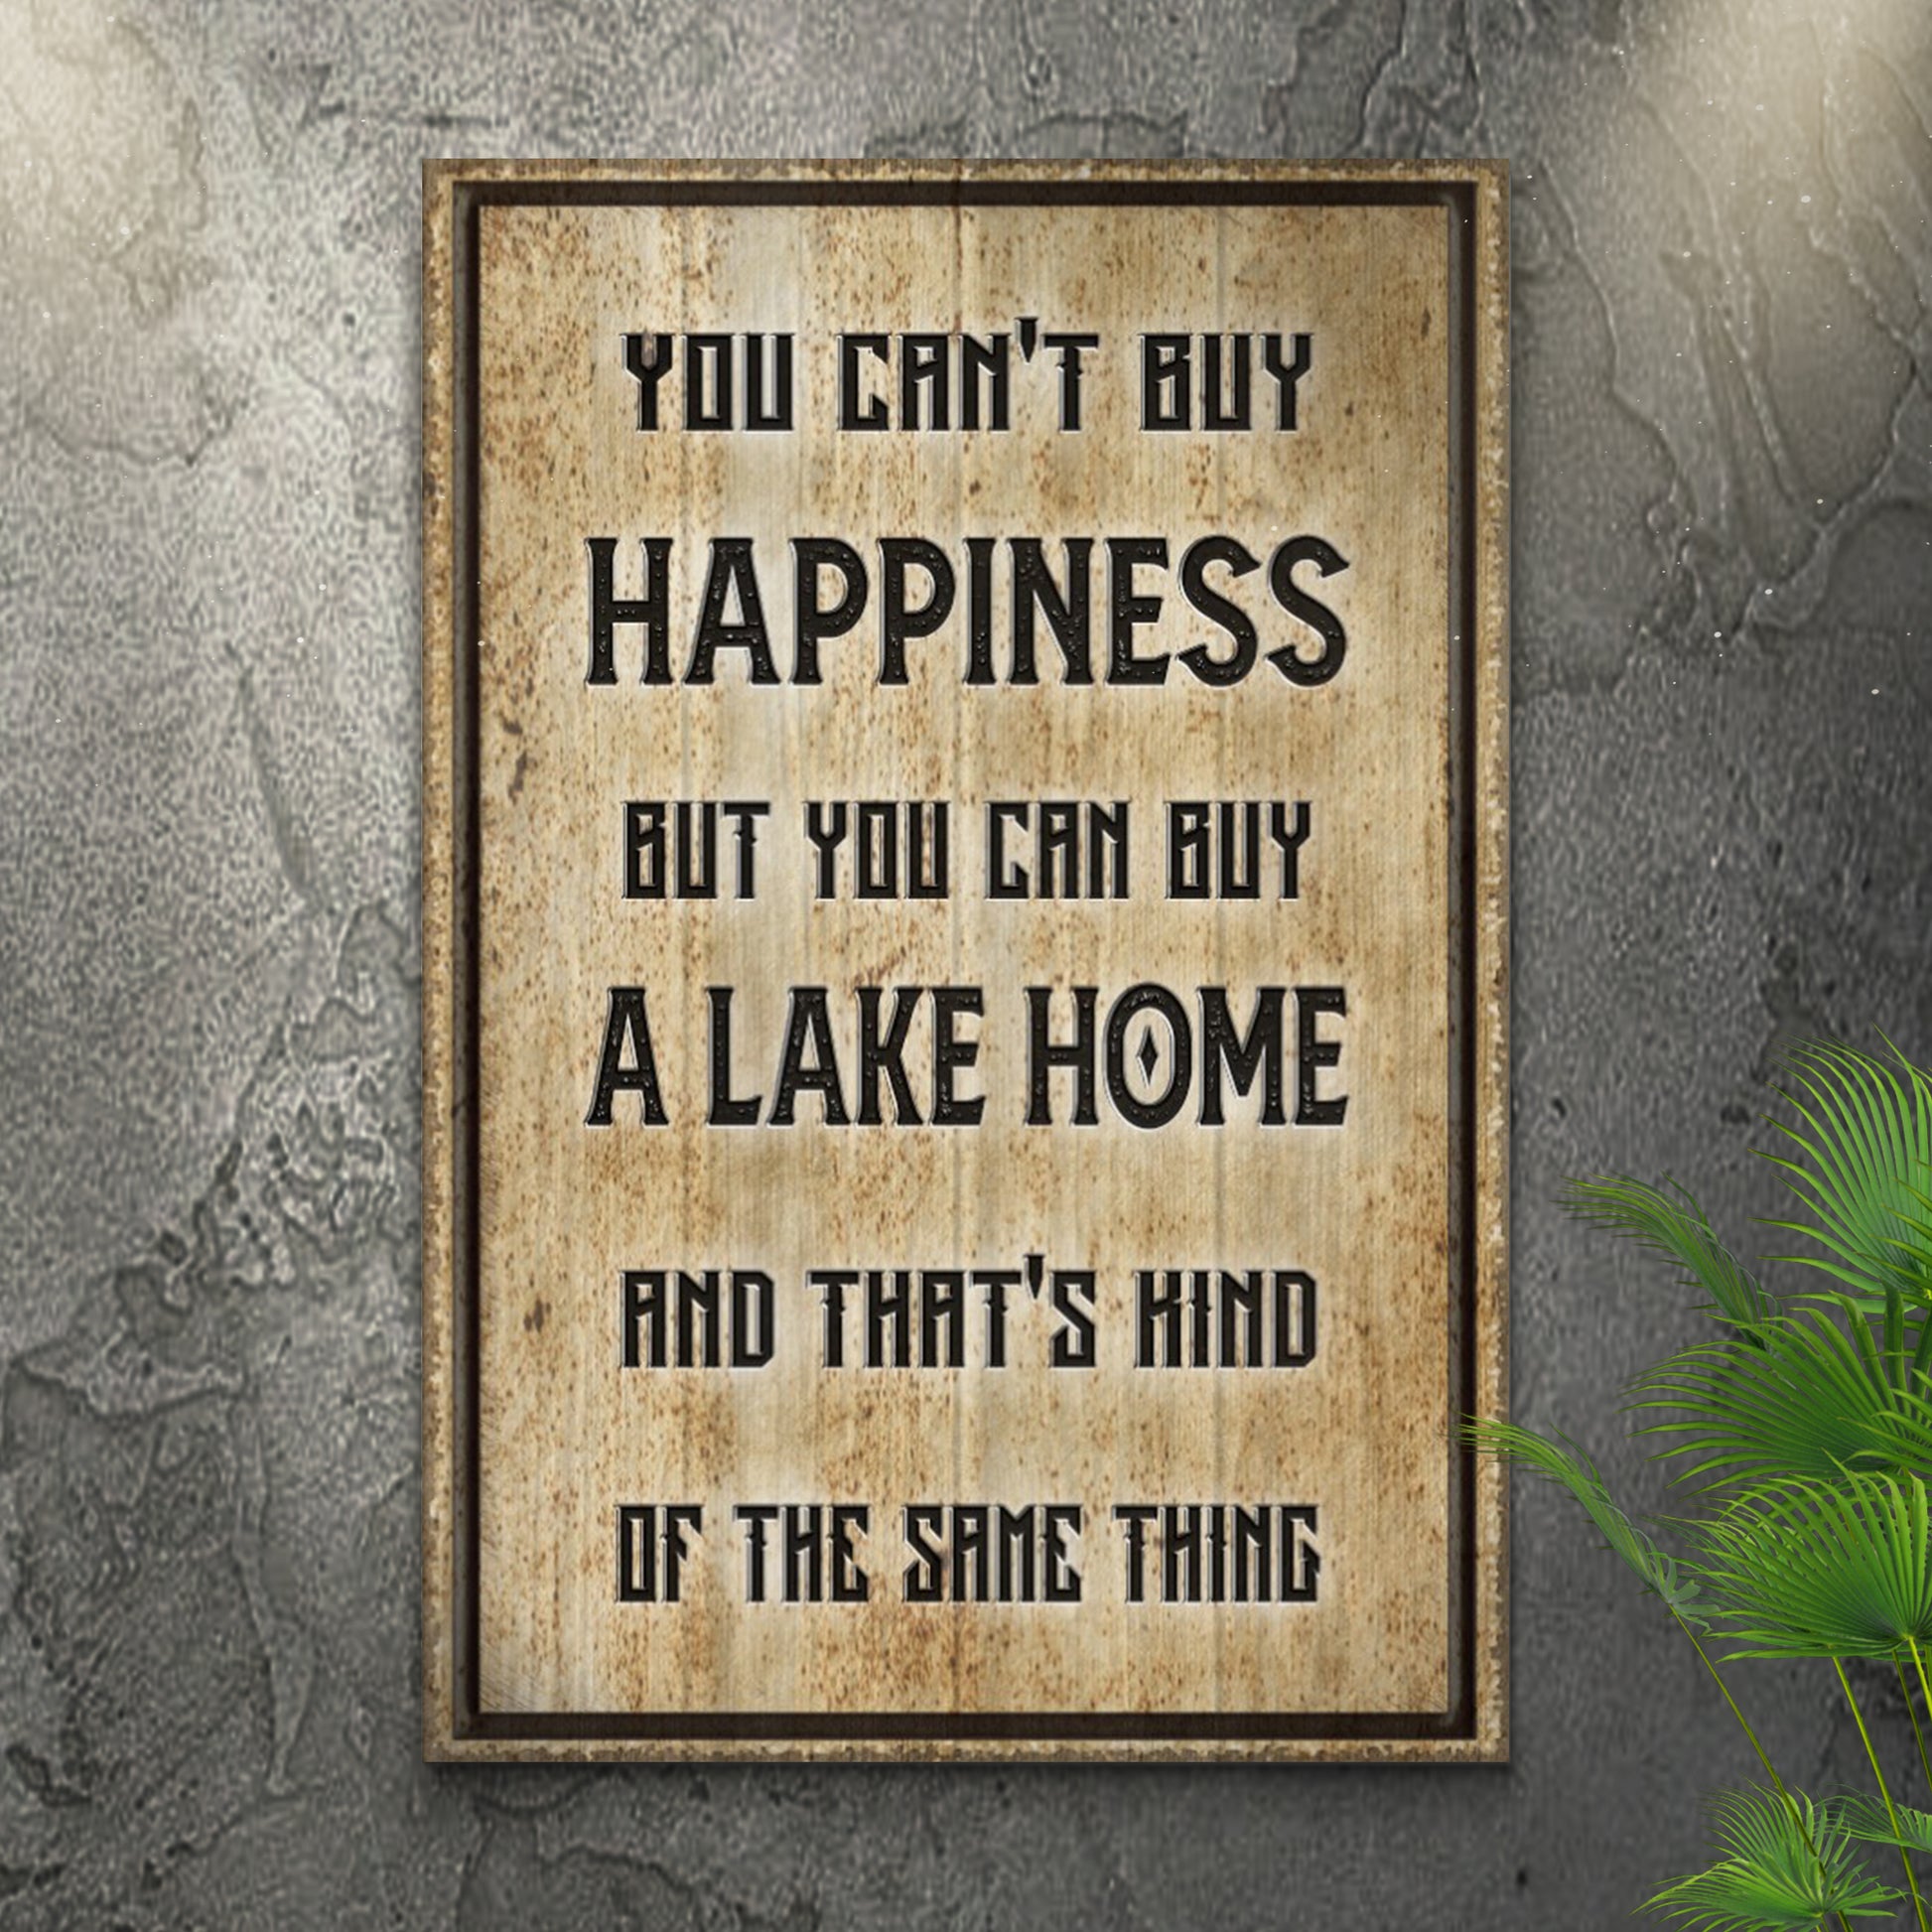 Lake Home Sign - Image by Tailored Canvases